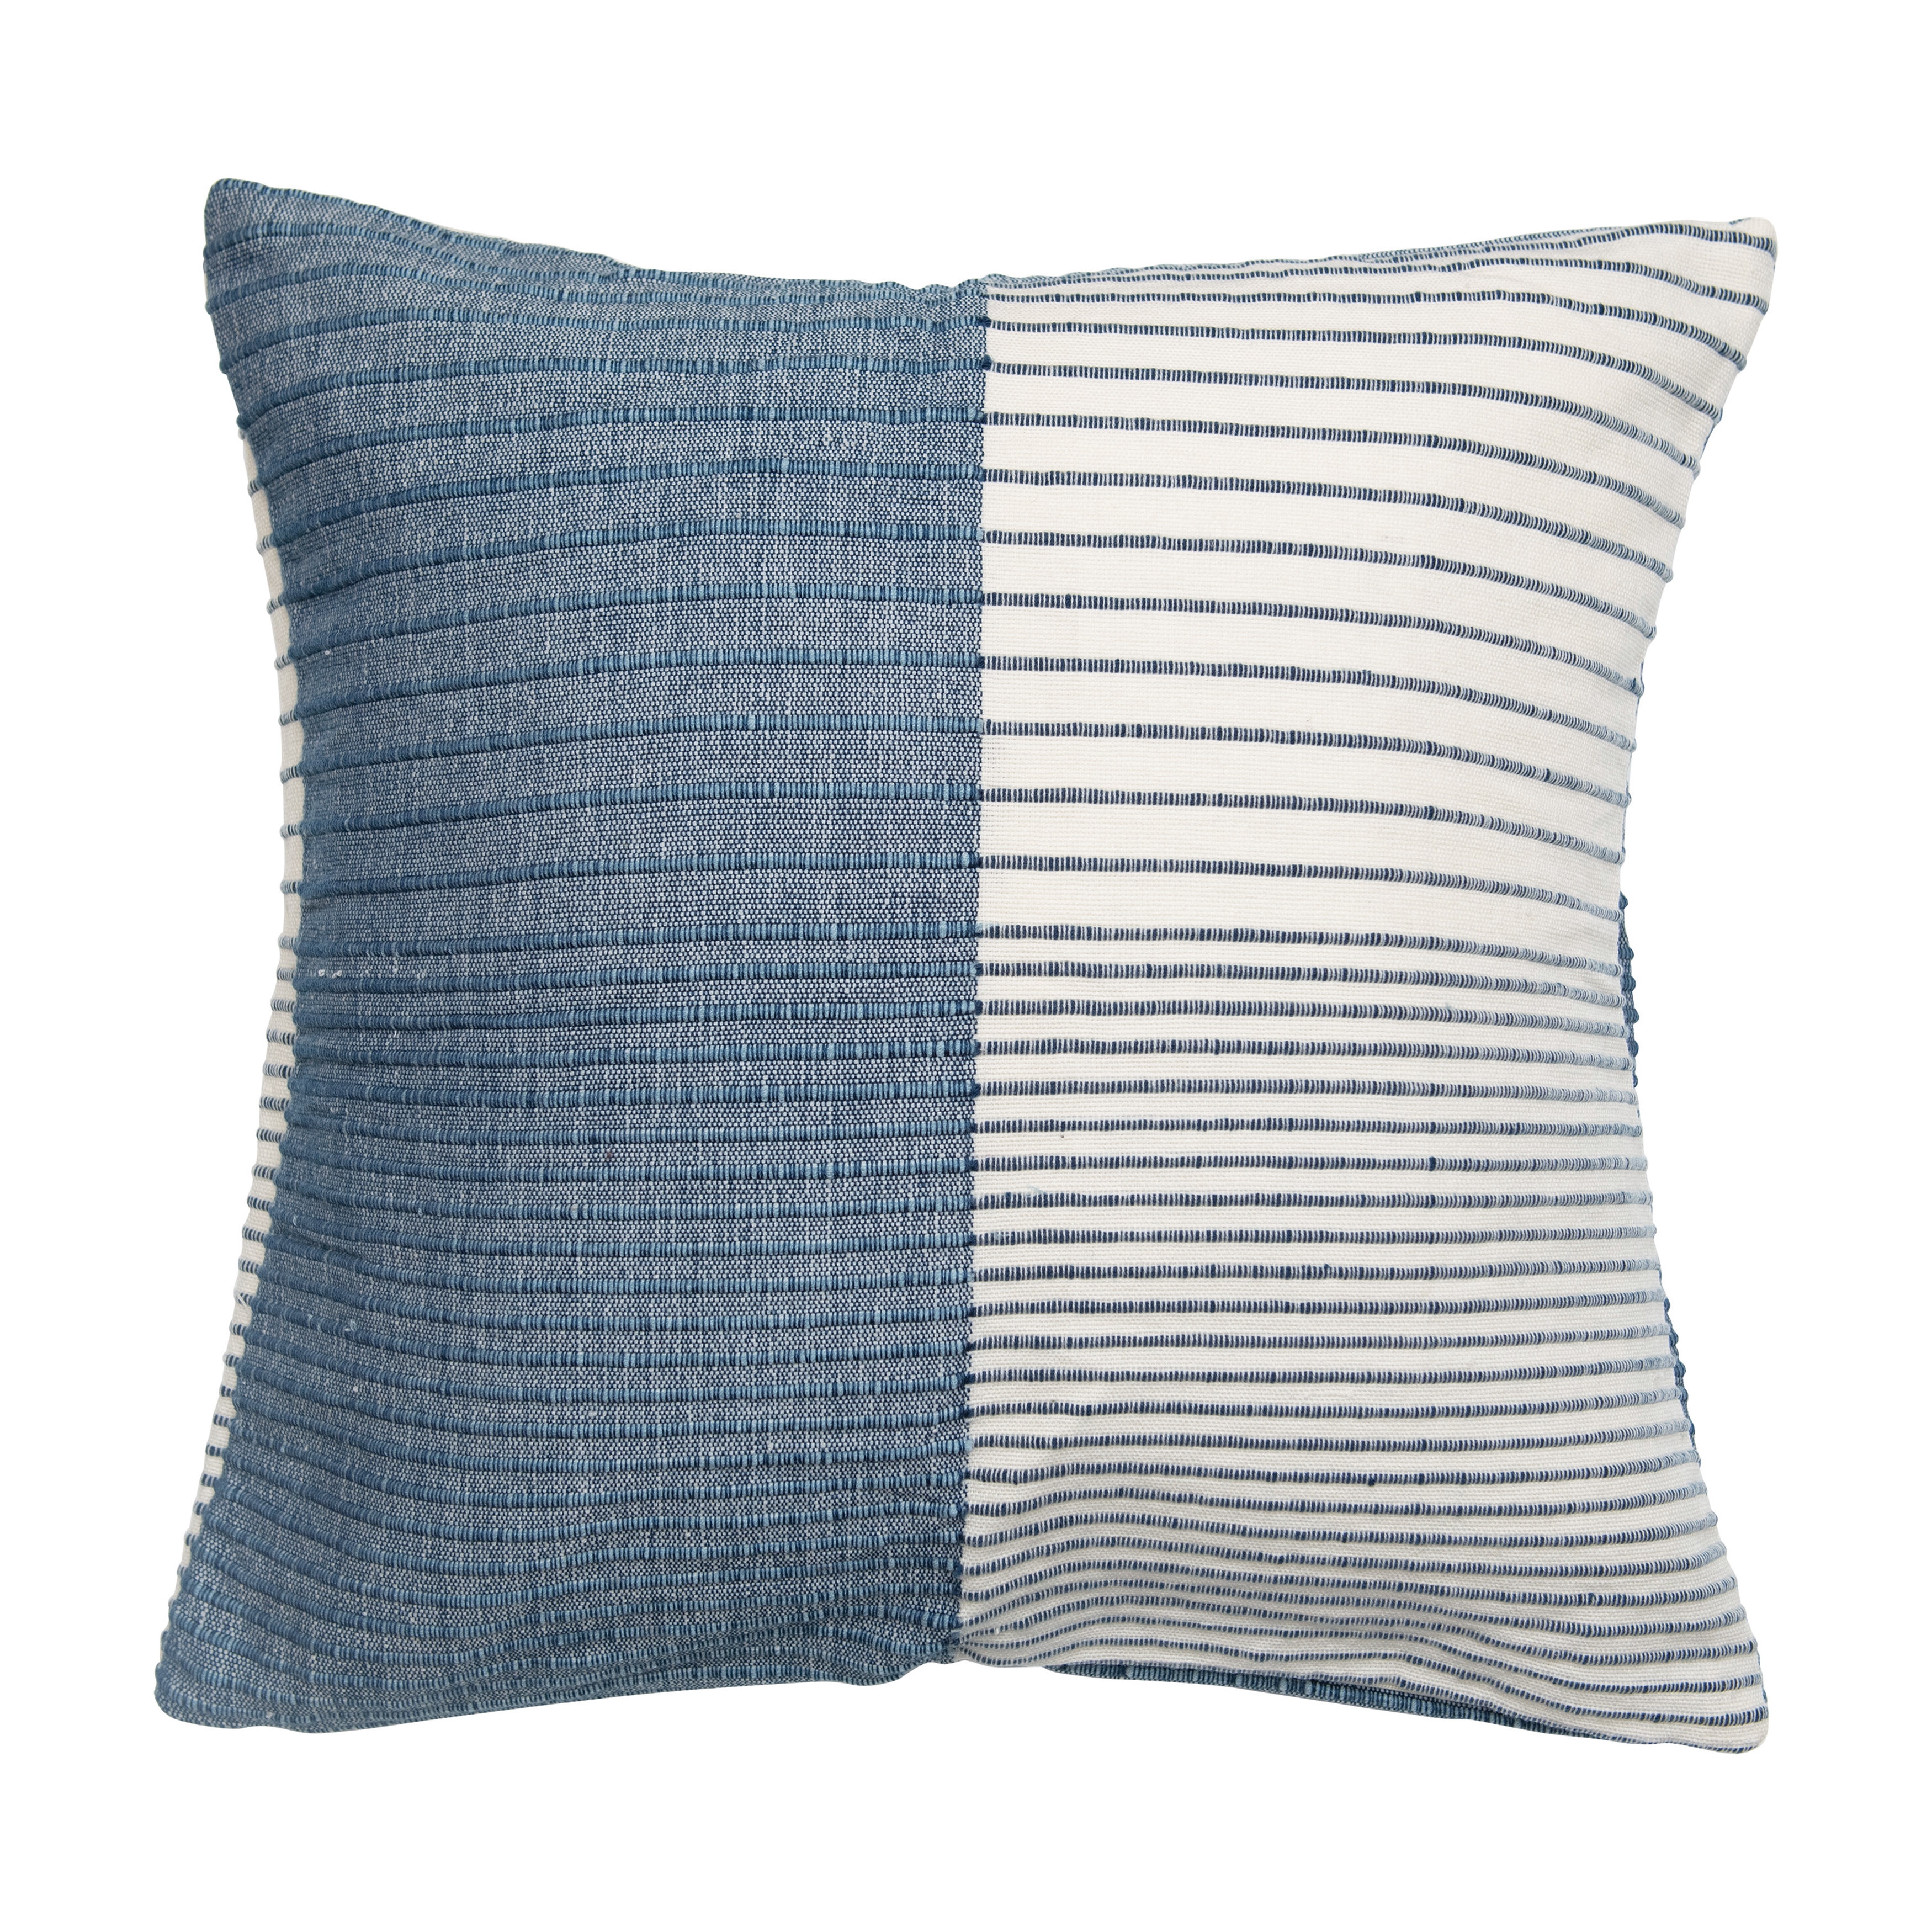 24" Square Woven Wool & Cotton Pillow with Stripes - Image 0